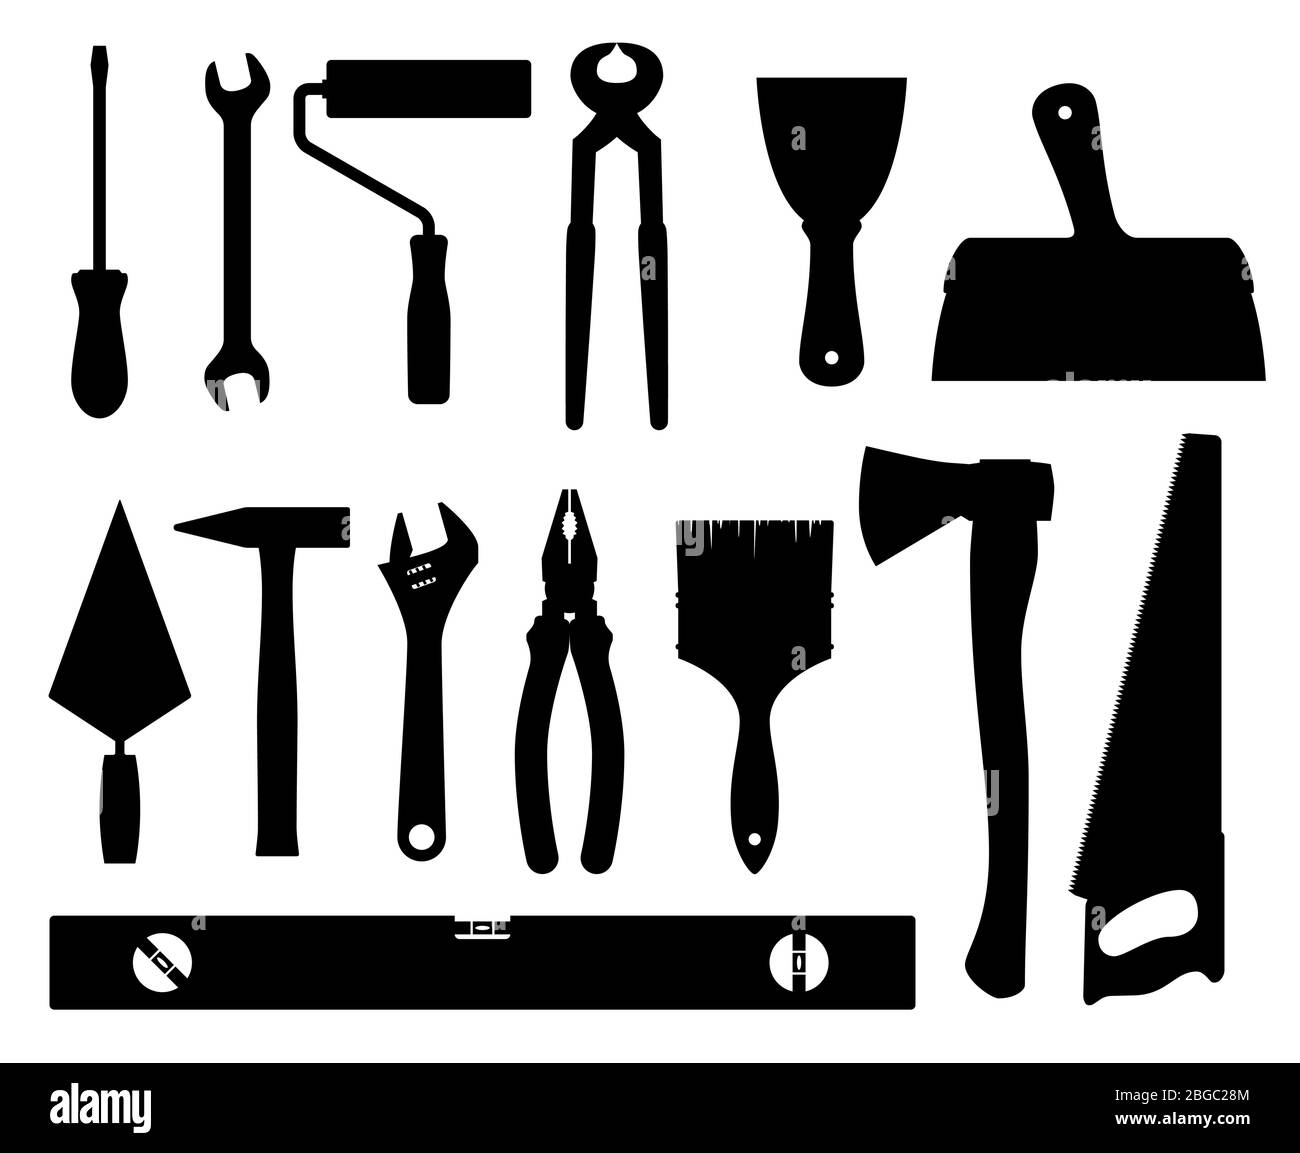 Construction tools vector black silhouettes isolated on white background. Equipment tools hammer screwdriver, pliers and spanner illustration Stock Vector